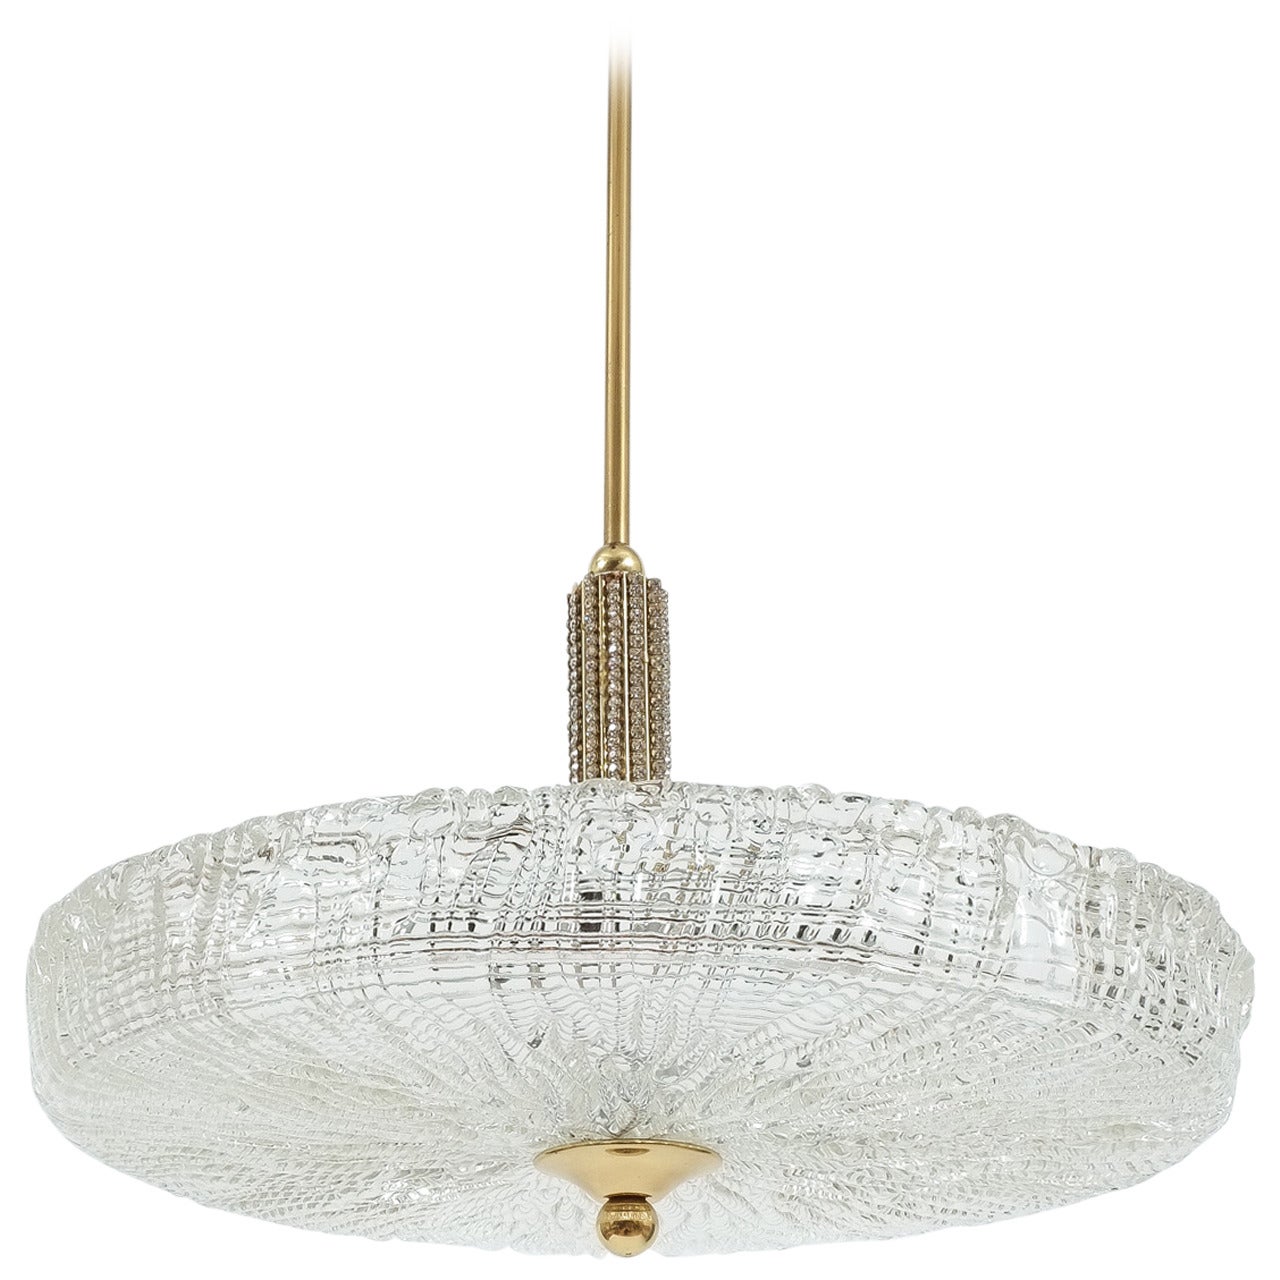 Petite Bakalowits Pendant Lamp with delicate Bead Inlays